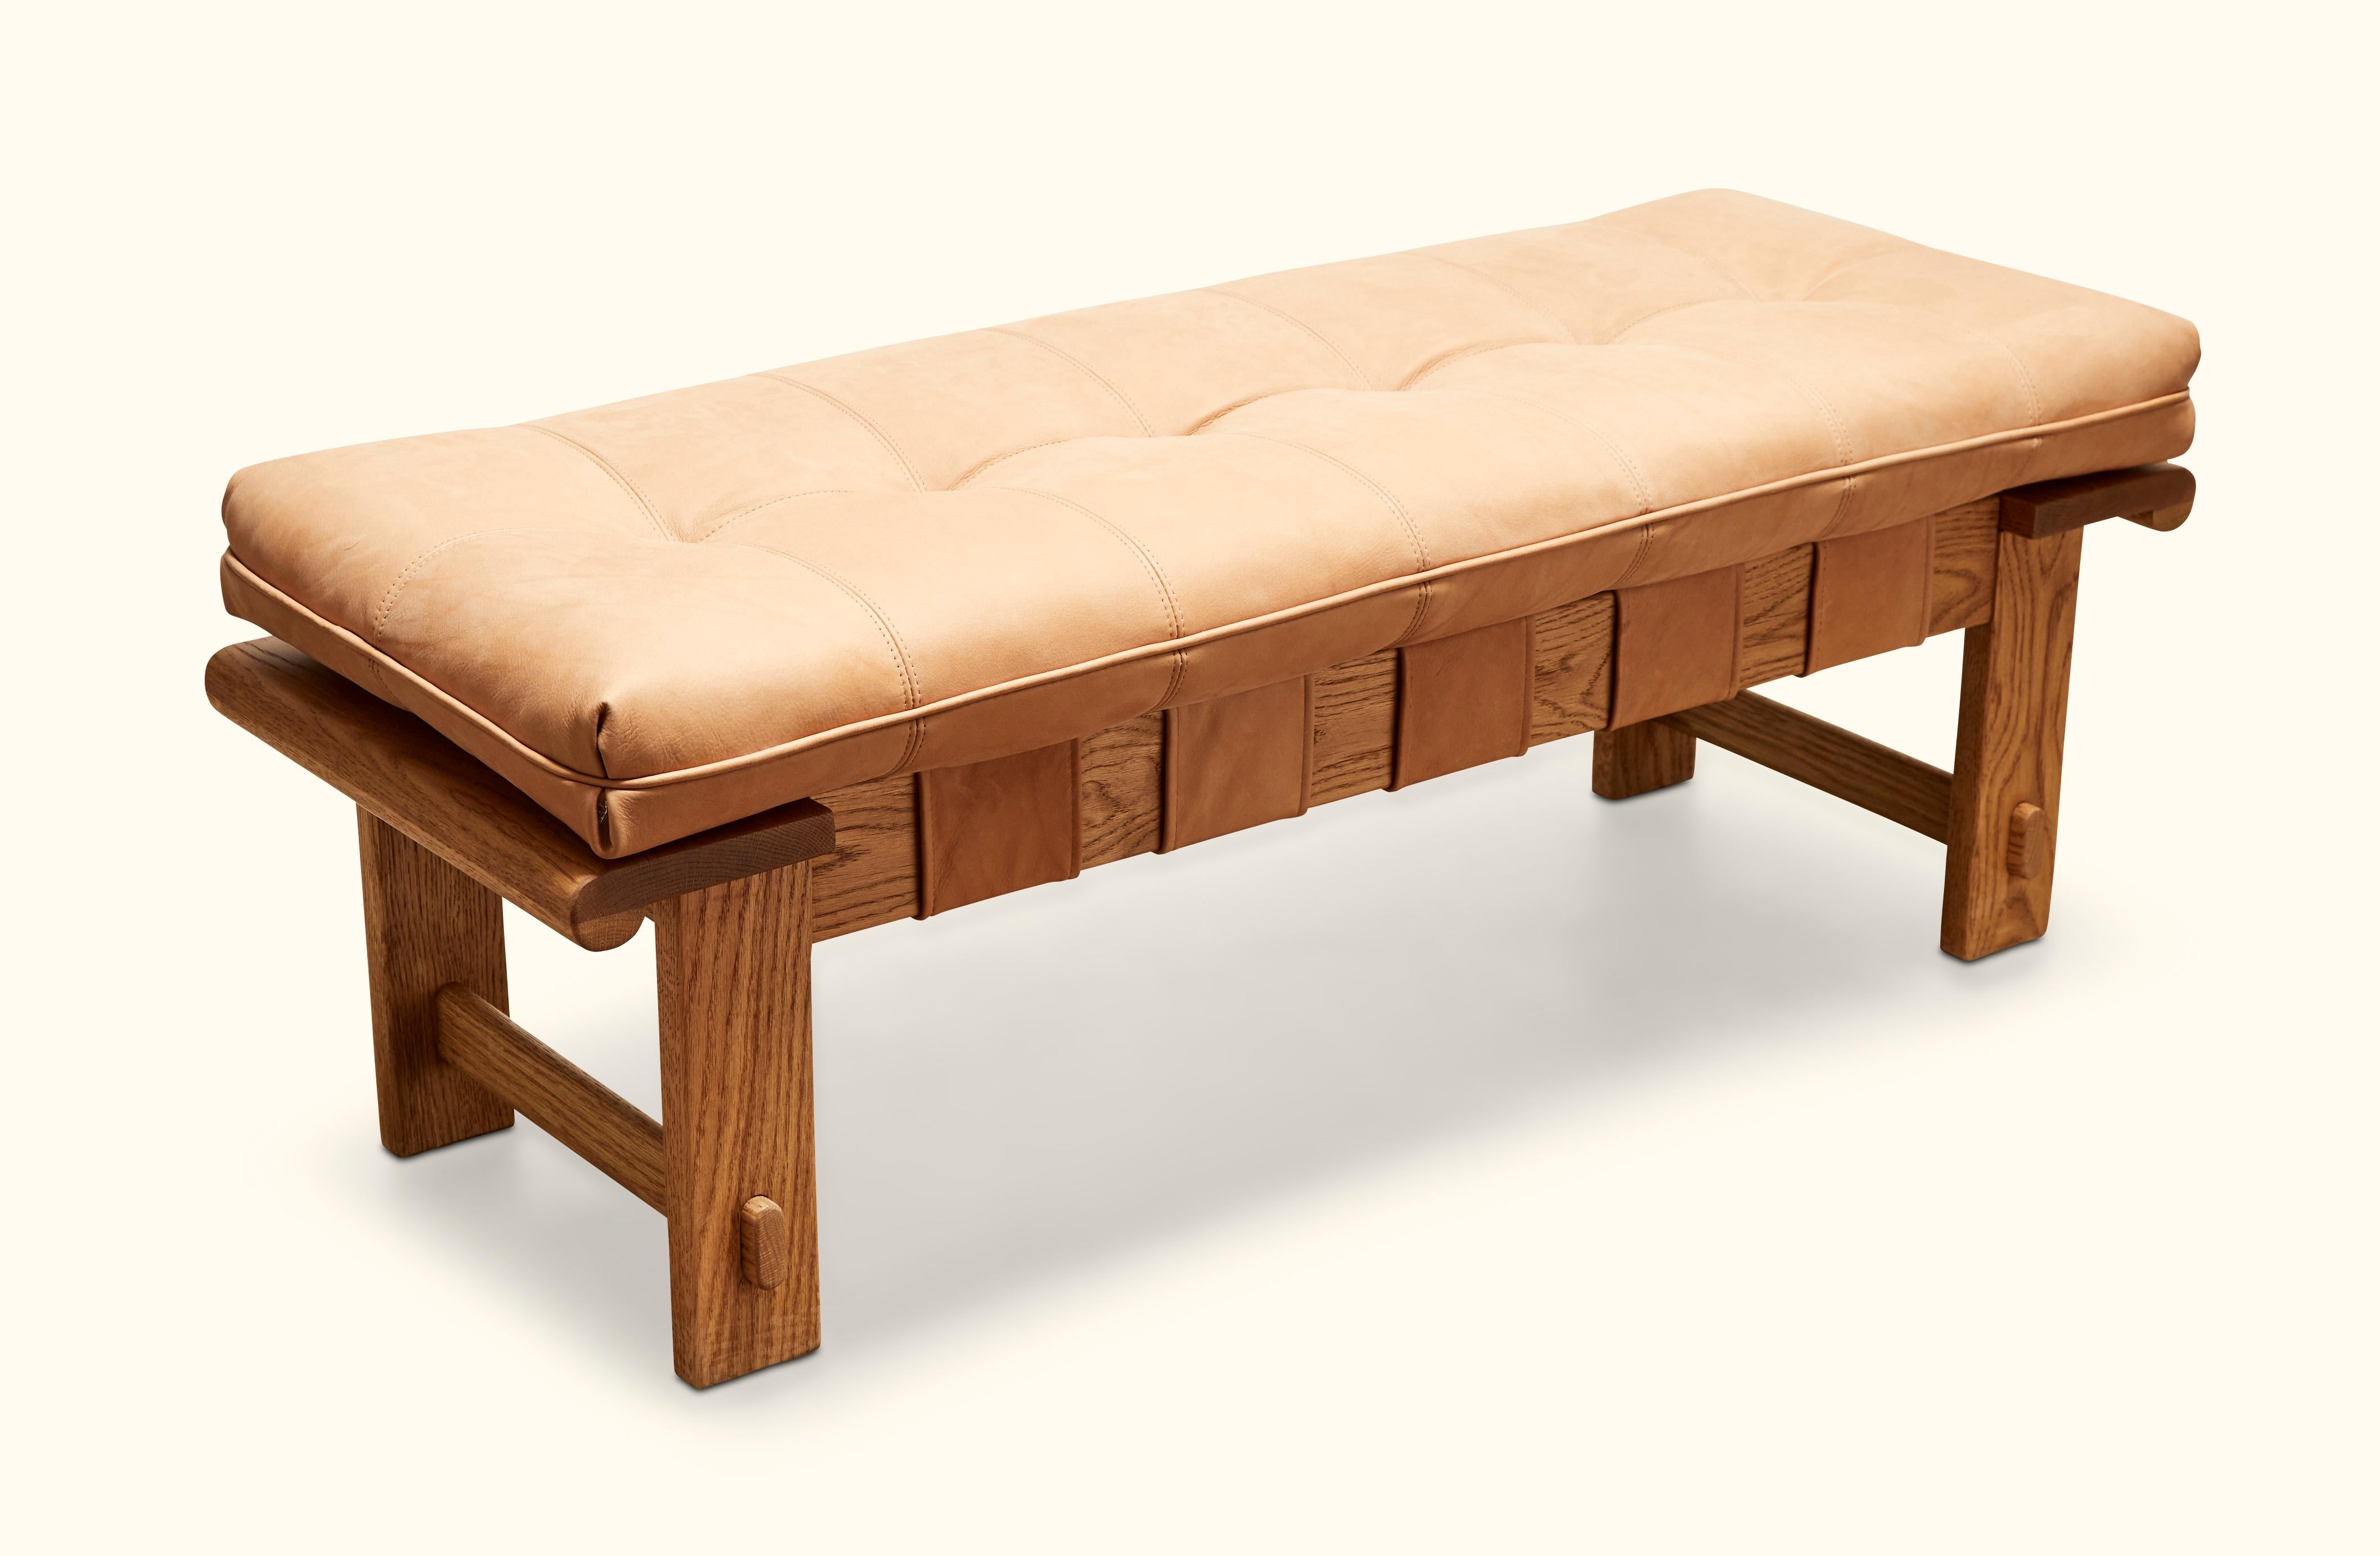 The Ojai Bench features a solid white oak or solid walnut base and a tufted leather cushion with leather straps. Available in two sizes. Shown here in Tan Leather and Oiled Oak.

The Lawson-Fenning Collection is designed and handmade in Los Angeles,